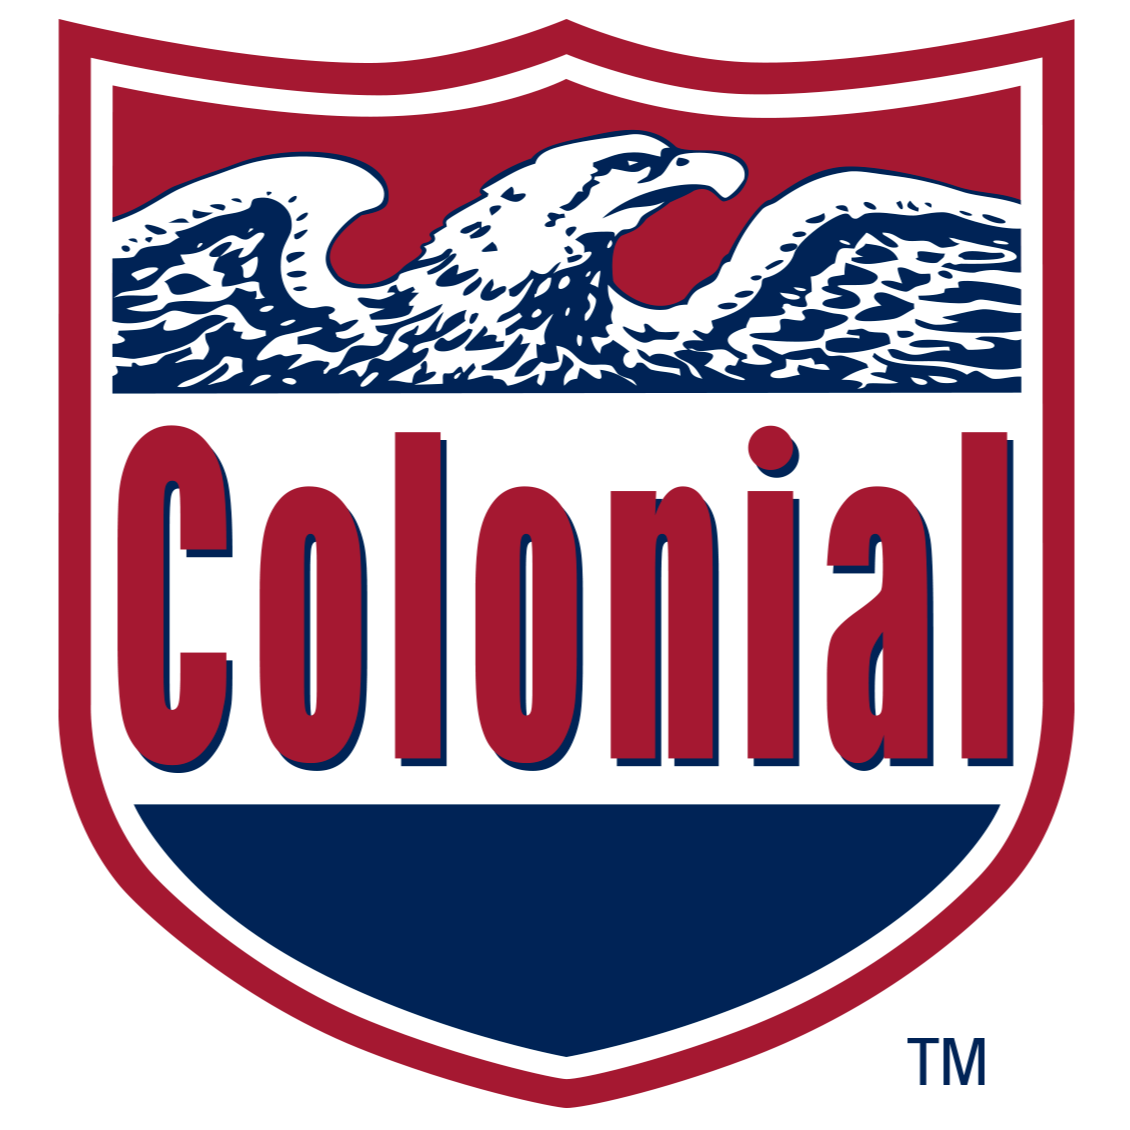 Colonial Oil Industries, Inc.